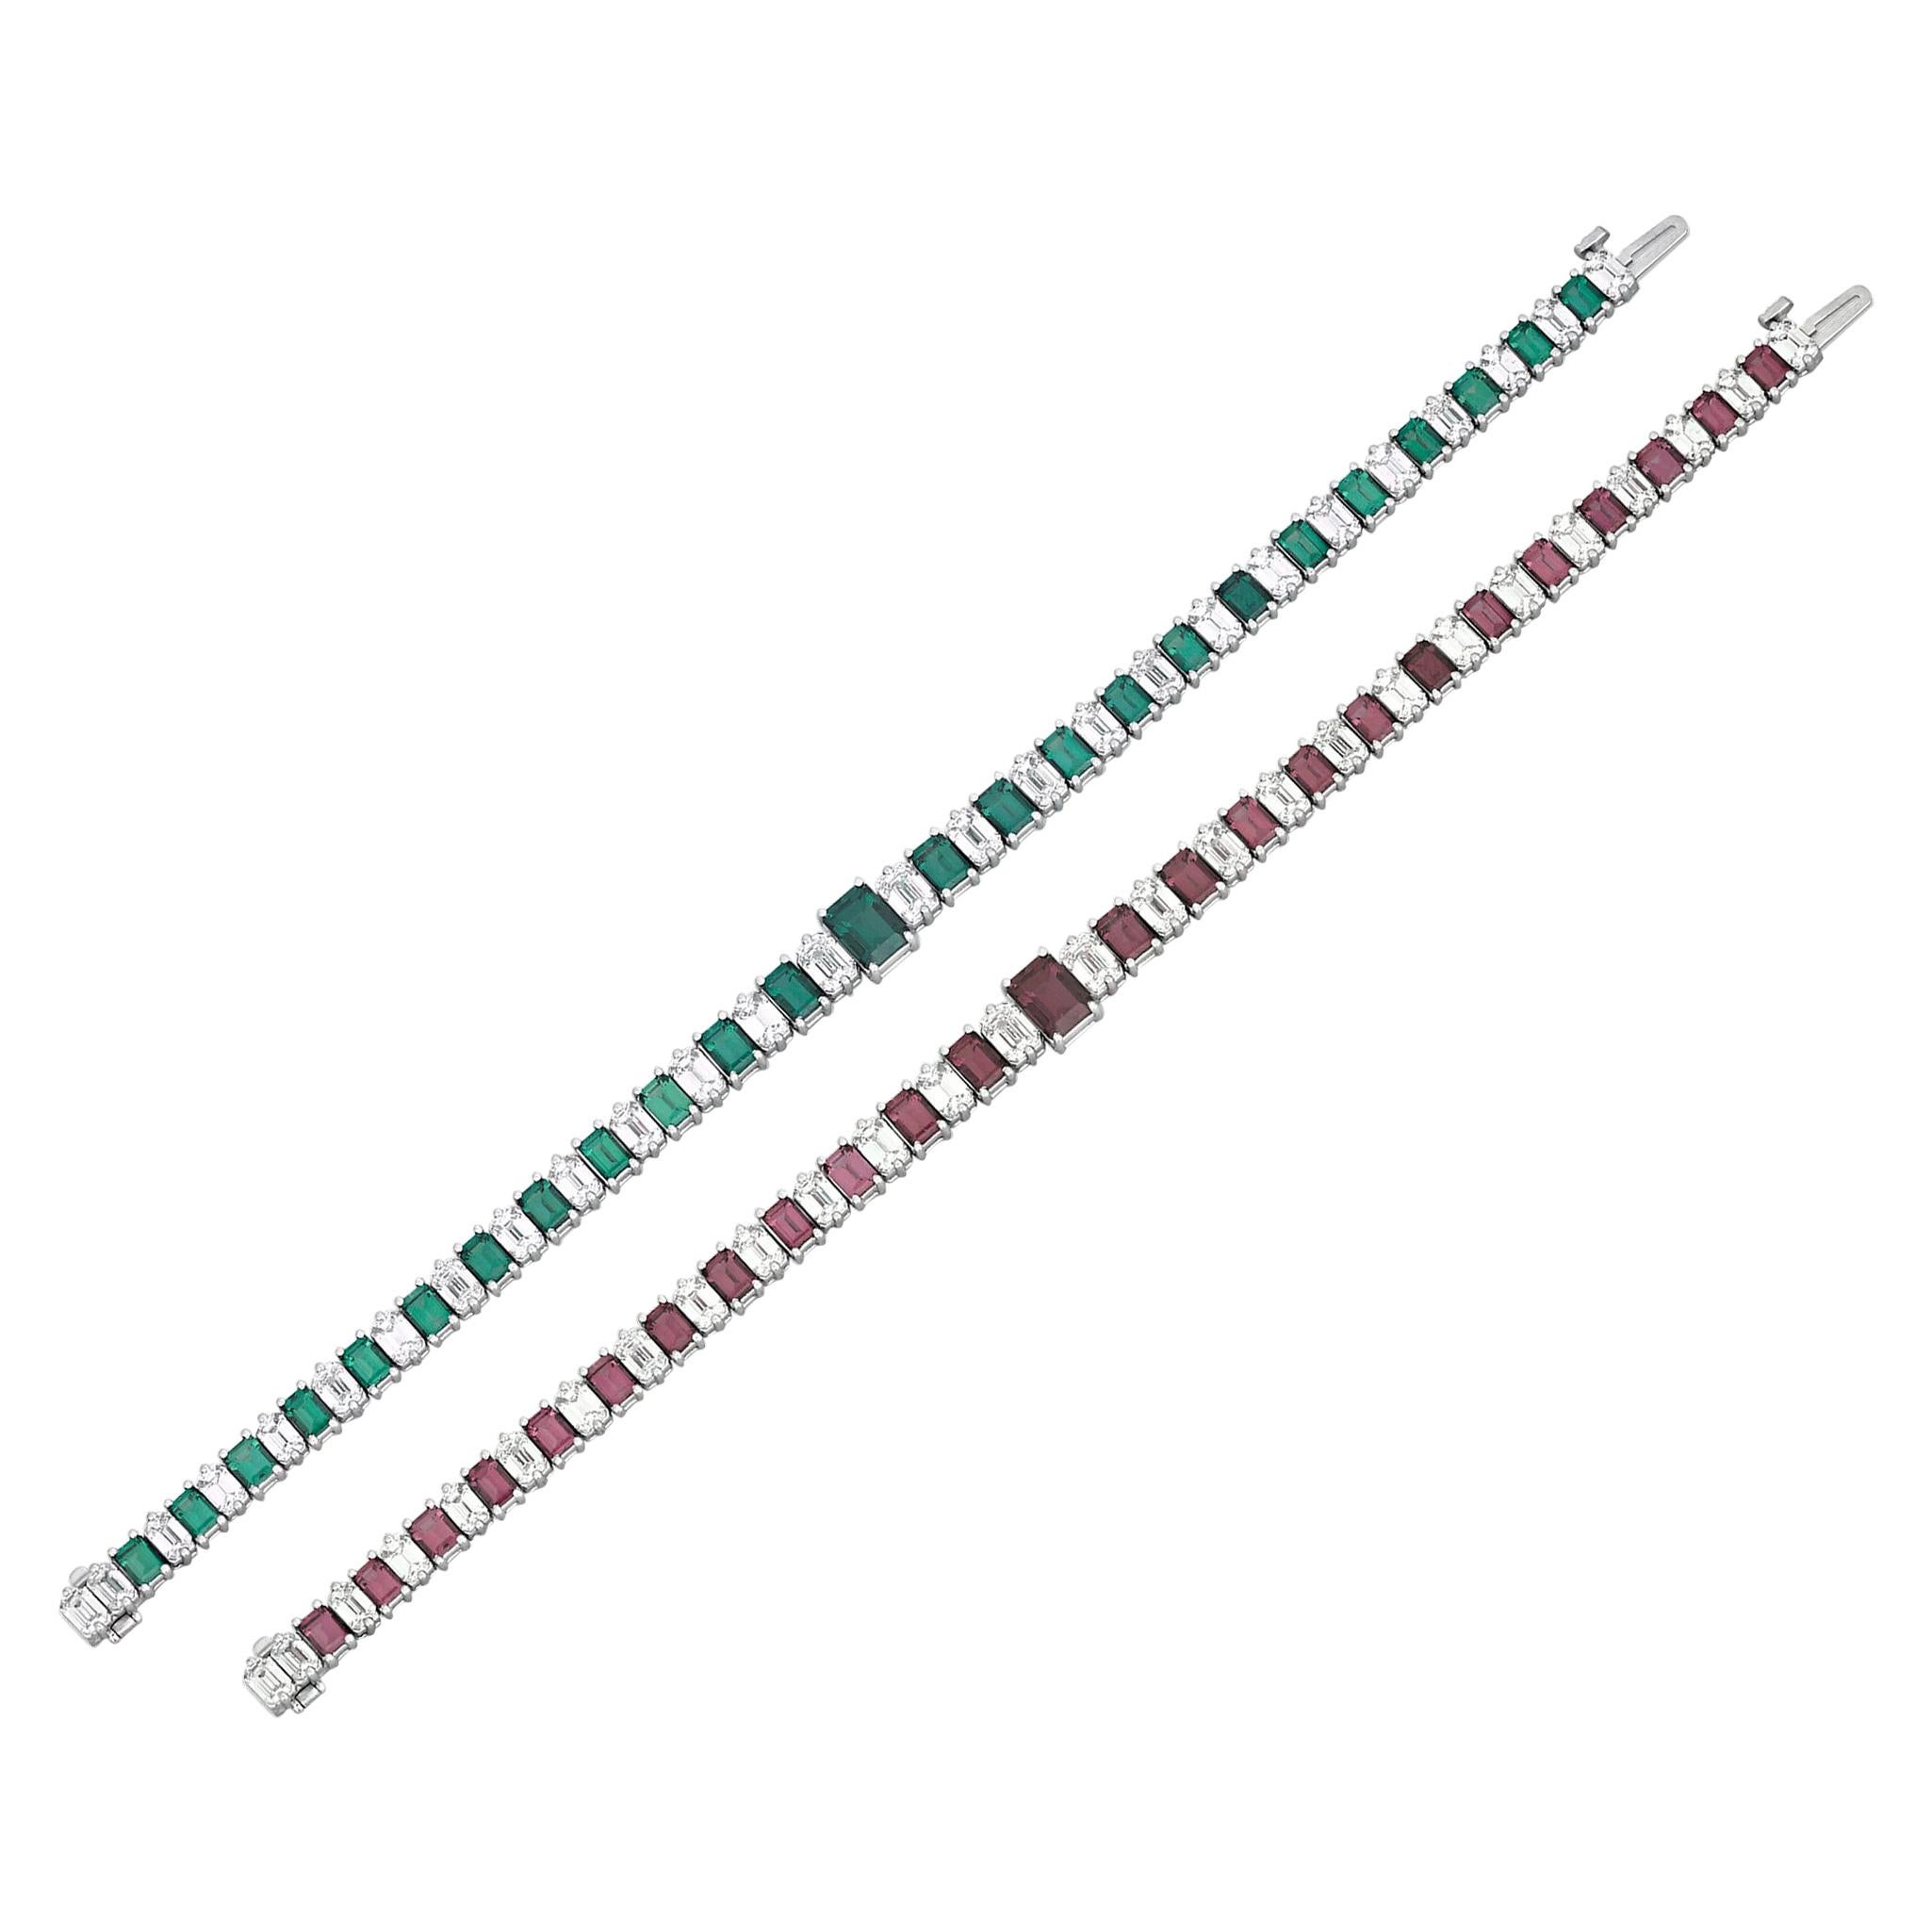 Twenty-five extremely rare alexandrites display their fascinating ability to change color in this classic tennis bracelet. Totaling 8.24 carats, the emerald-cut stones exhibit a lovely bluish-green hue in daylight and a purple color when viewed